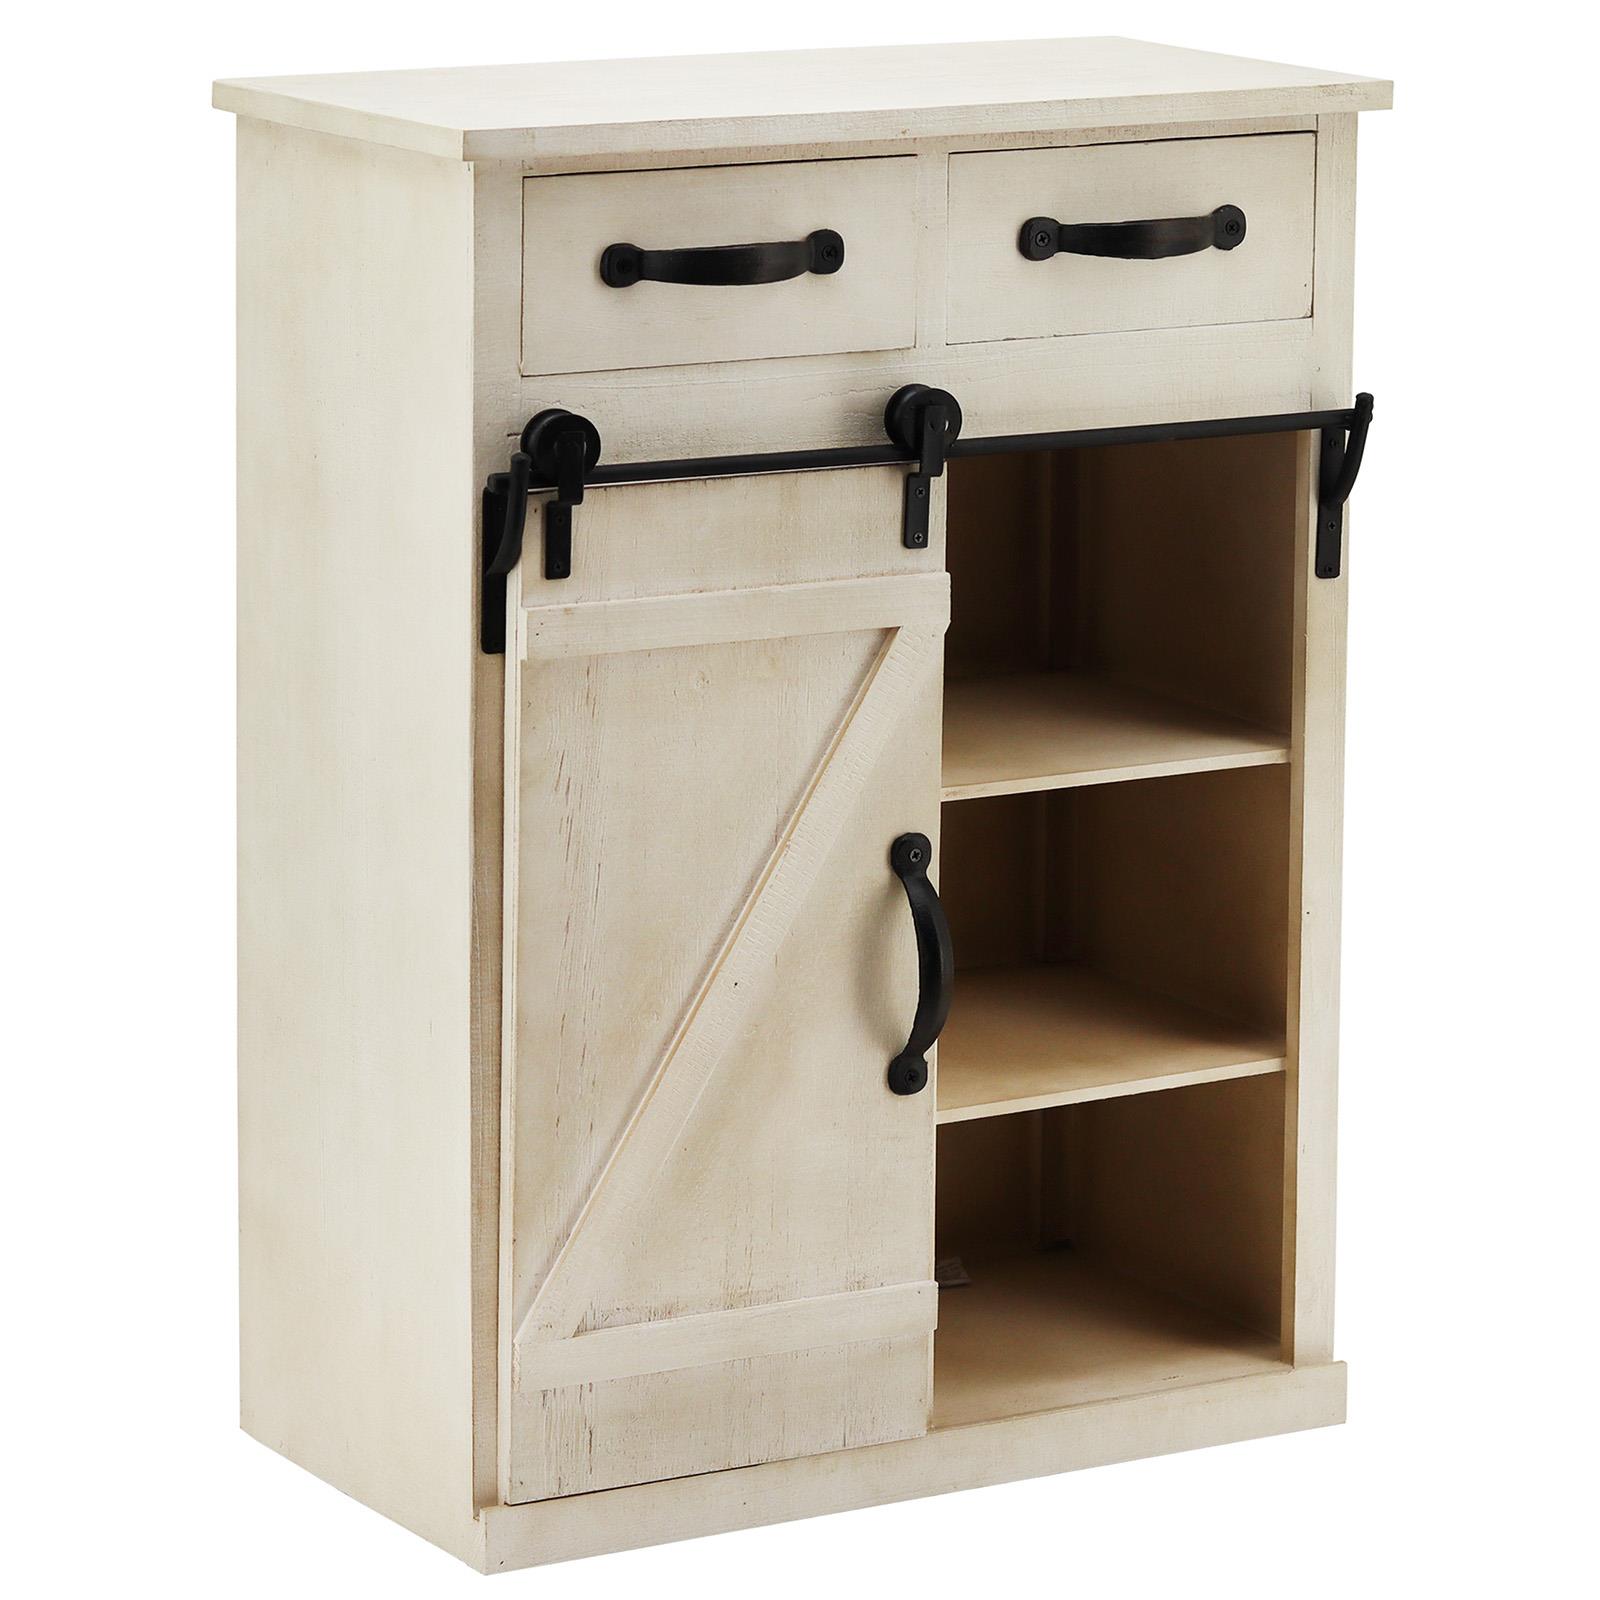 Zimtown Wood Accent Chest Sideboard Cabinet Entryway Table Retro Style with Farmhouse Single Barn Door, 2 Drawers White - image 3 of 10